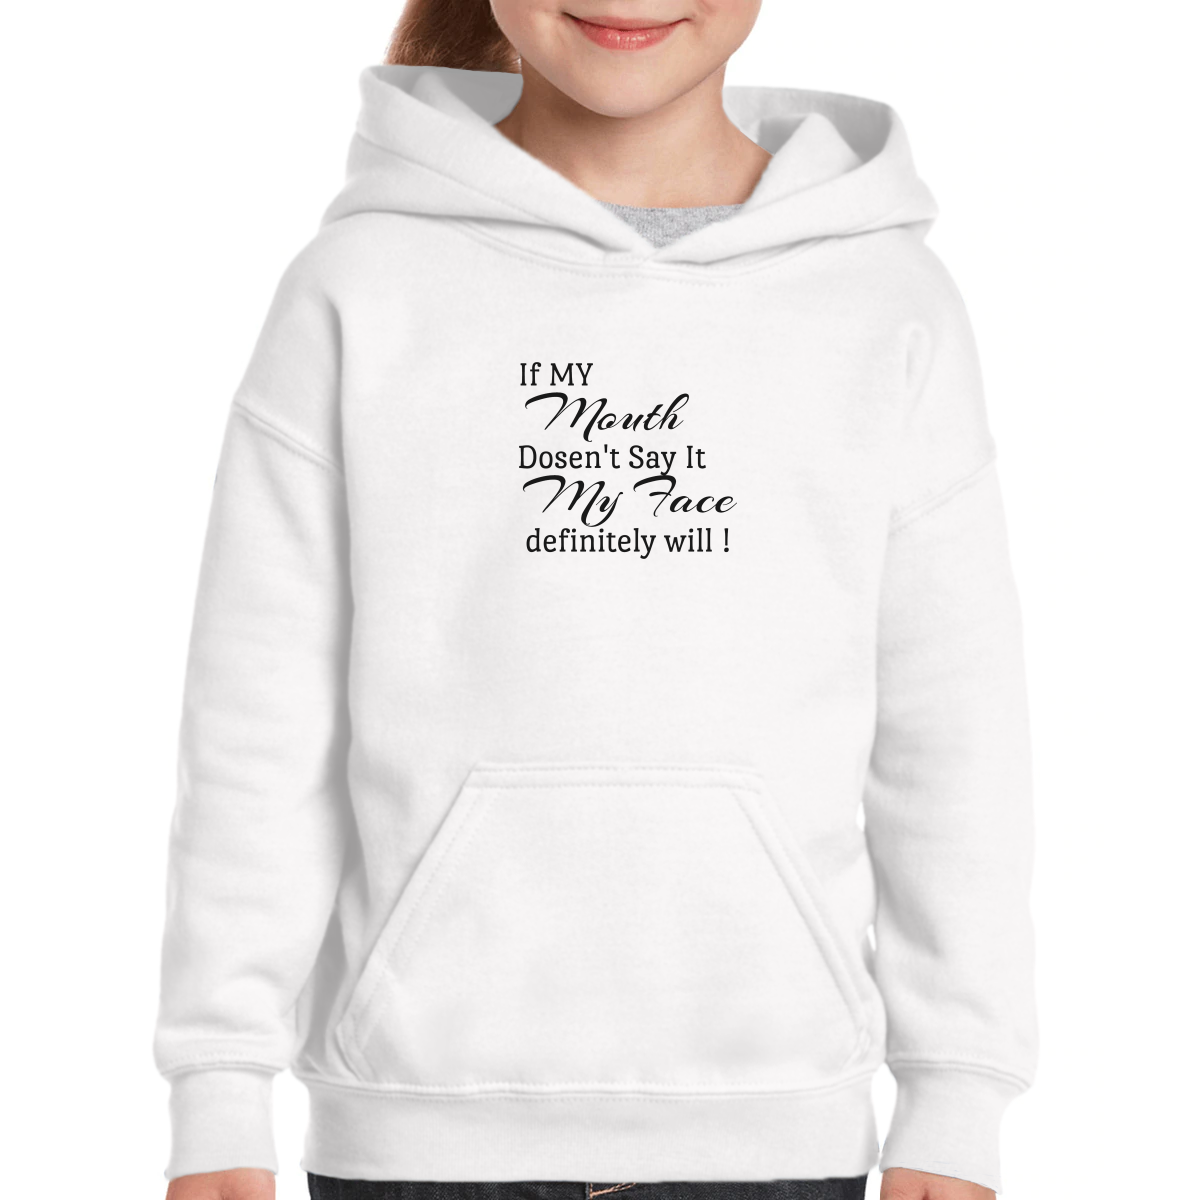 If My Mouth Doesn't Say It My Face Definitely Will  Kids Hoodie | White